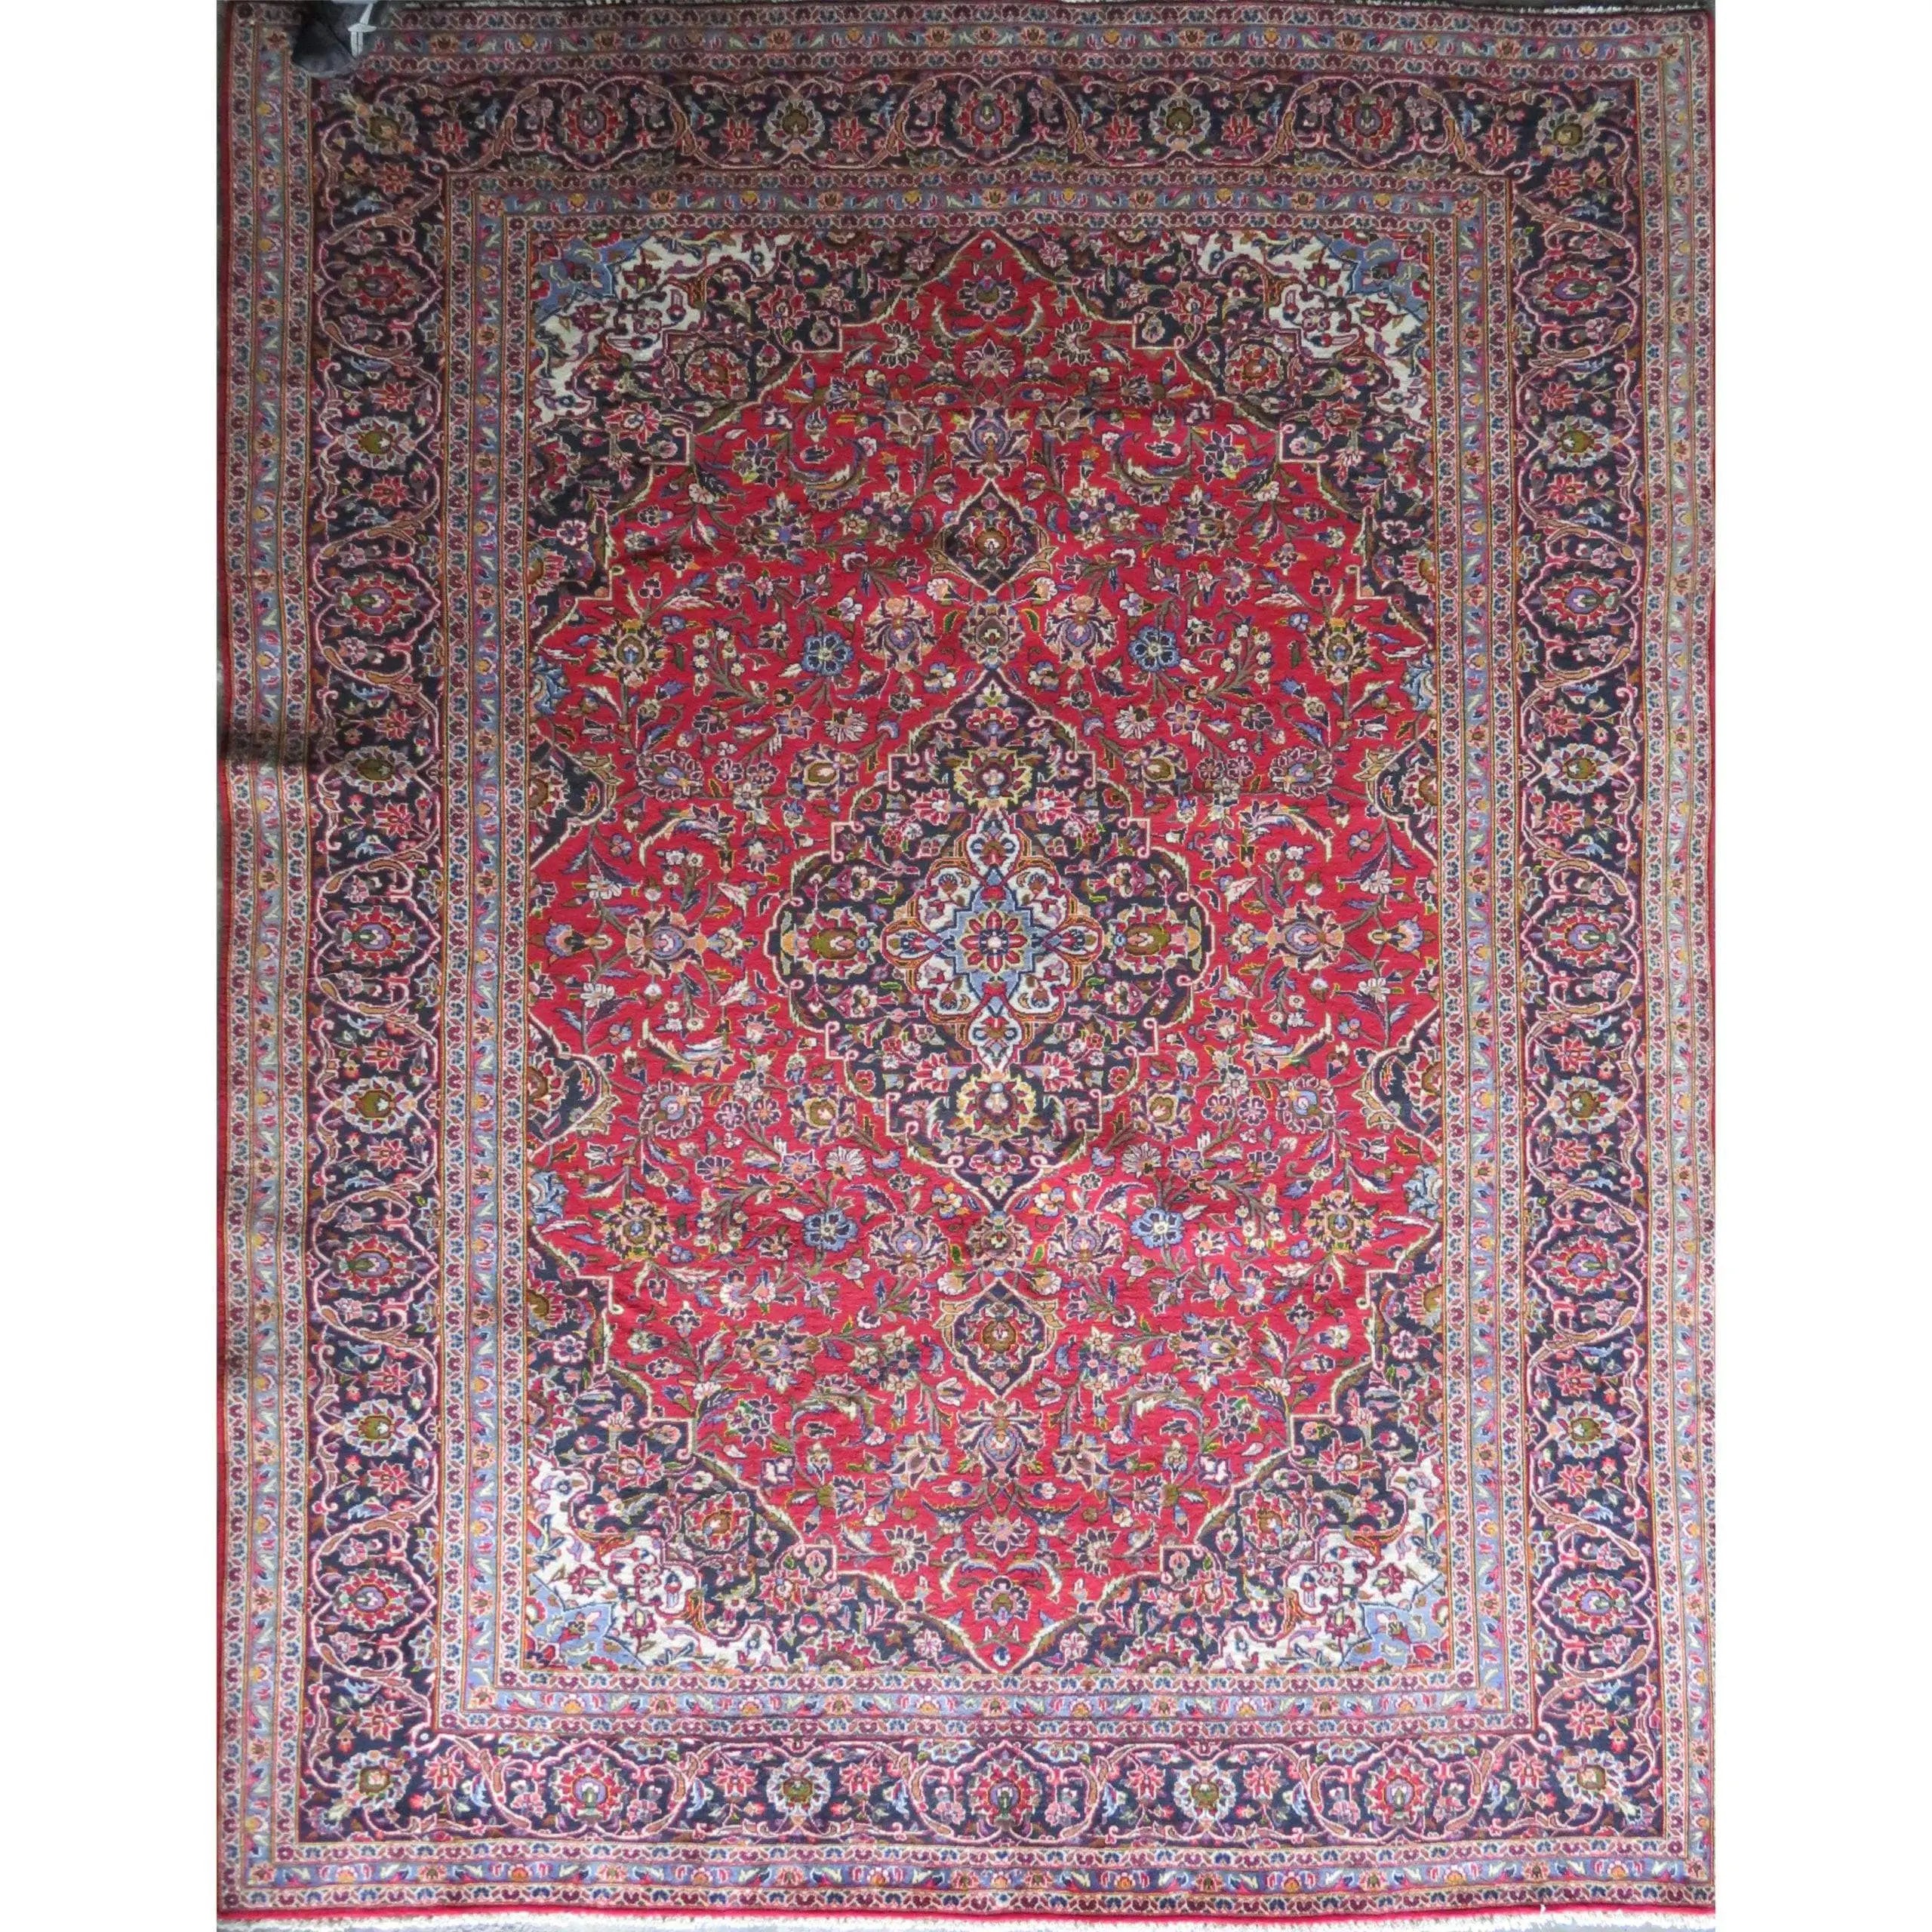 Hand-Knotted Persian Wool Rug _ Luxurious Vintage Design, 12'1" X 9'4", Artisan Crafted